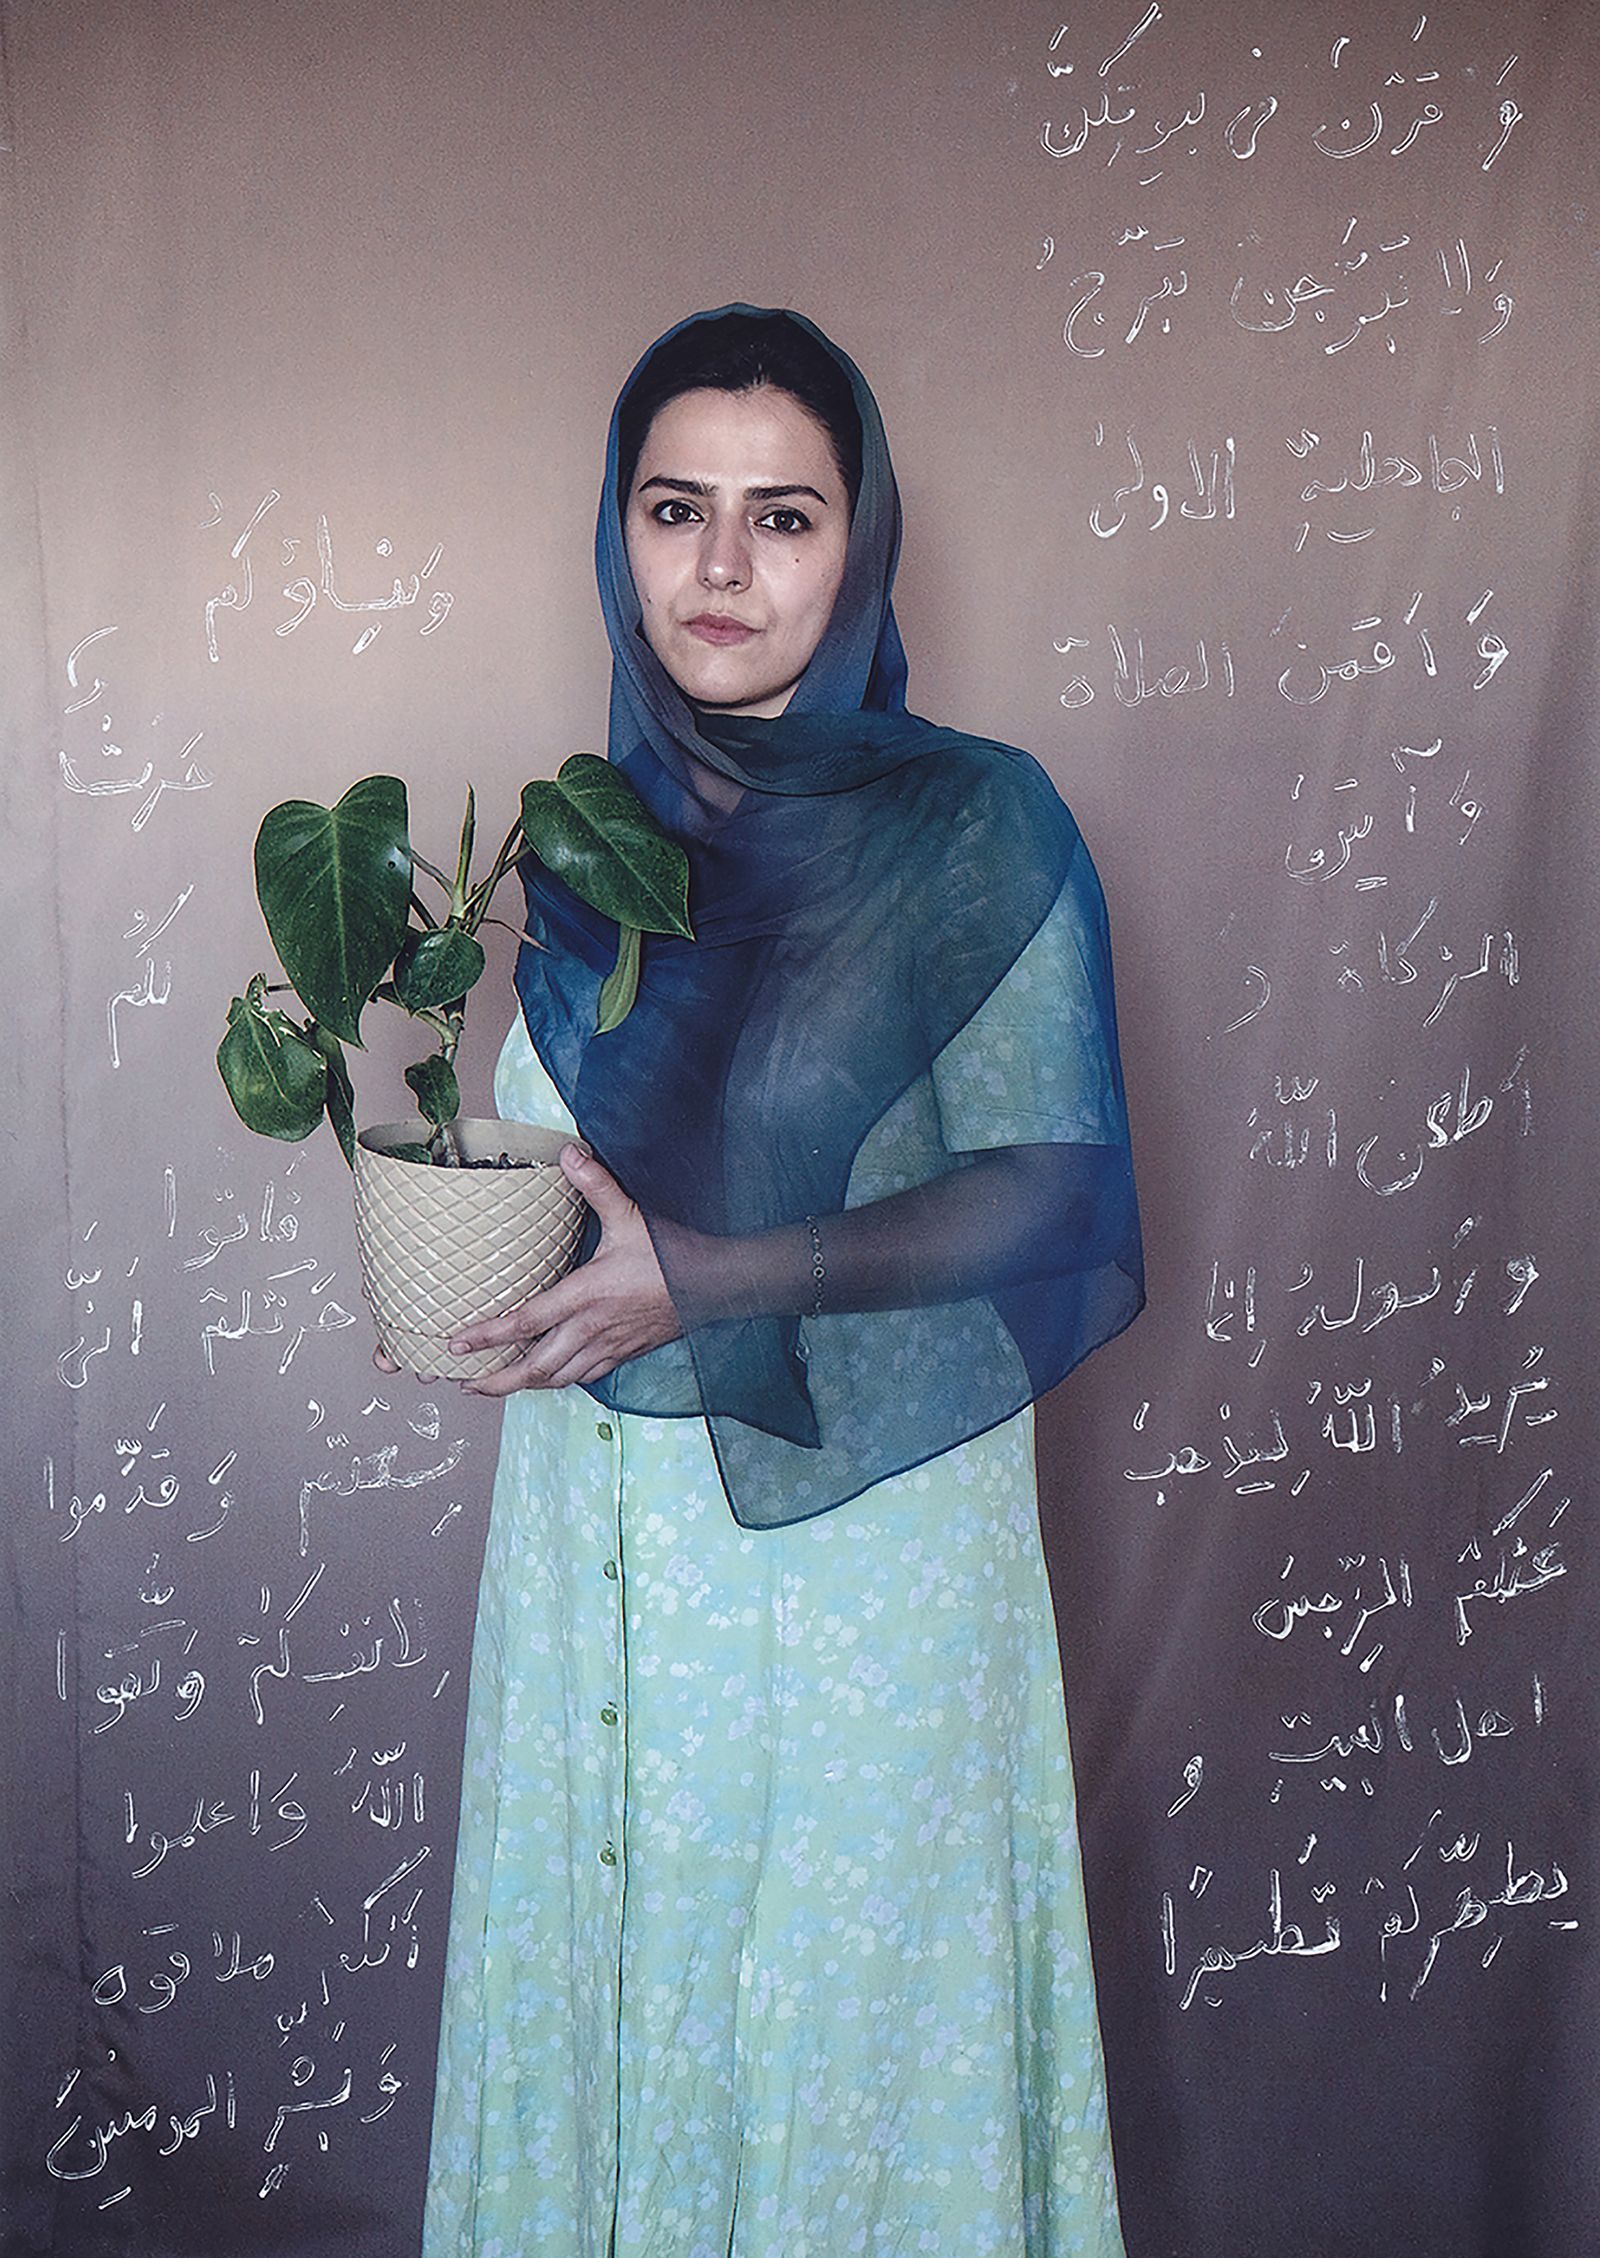 © sima choubdarzadeh - Image from the The lotus seeds sprout photography project